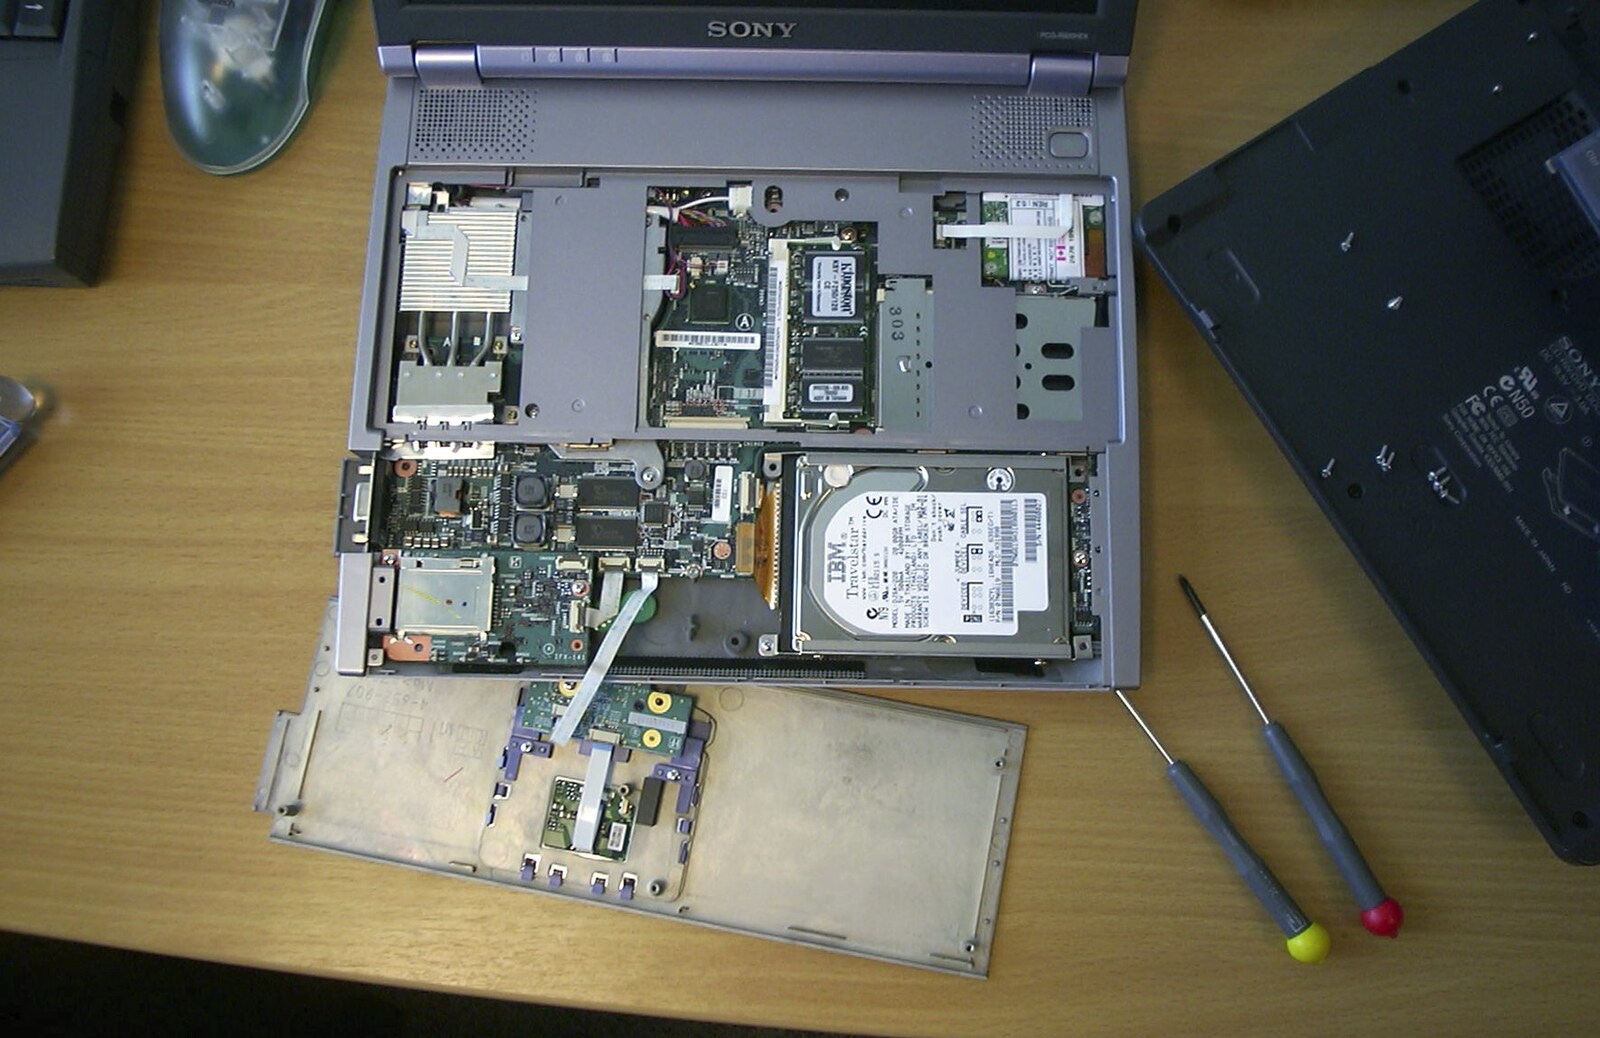 A laptop is taken apart from The BSCC at Laxfield and Hoxne, Suffolk - 2nd May 2002